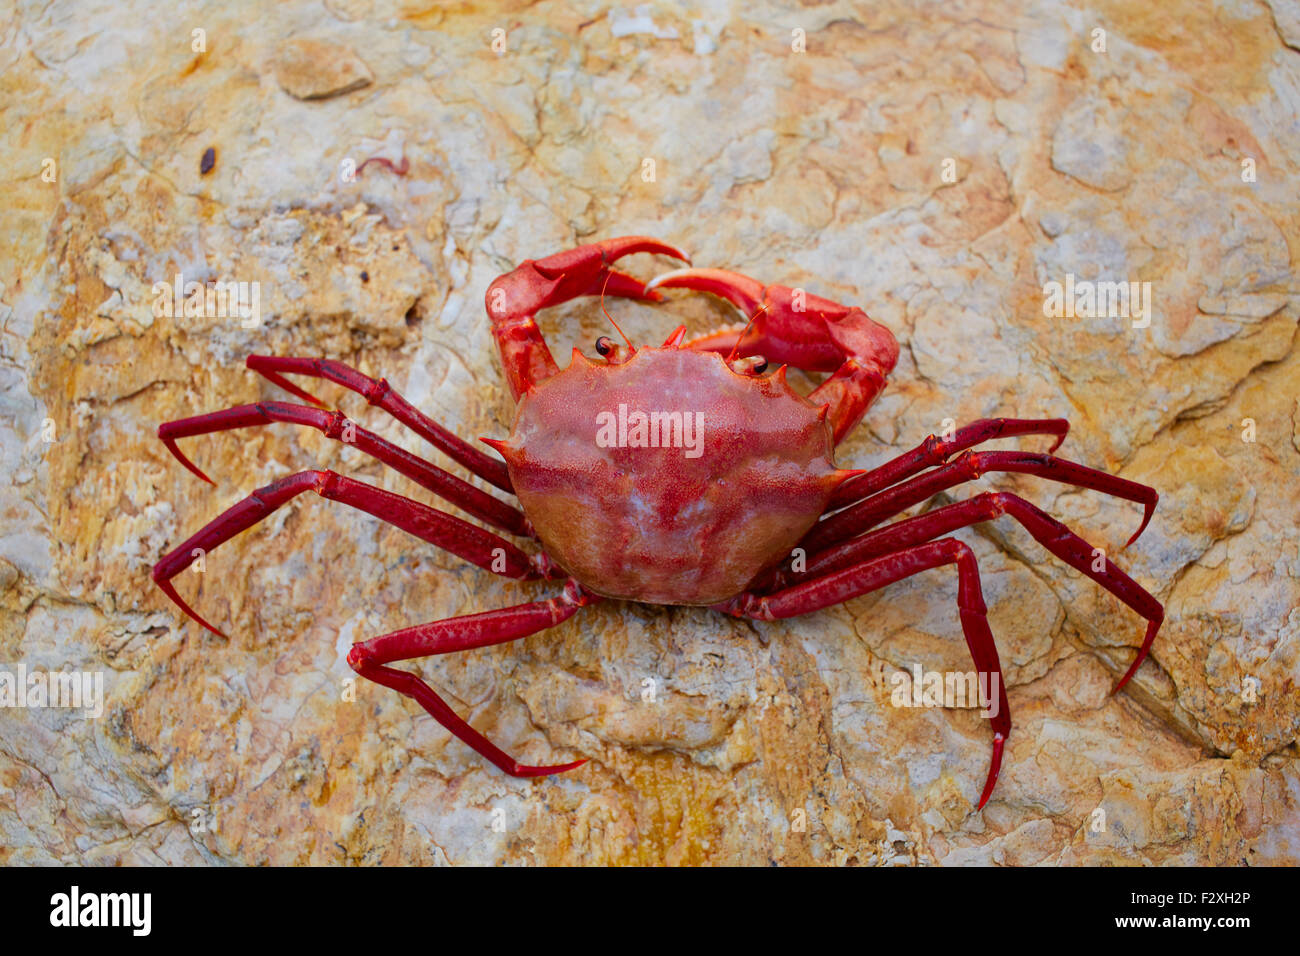 Geryon longipes is a Mediterranean crab red color Stock Photo